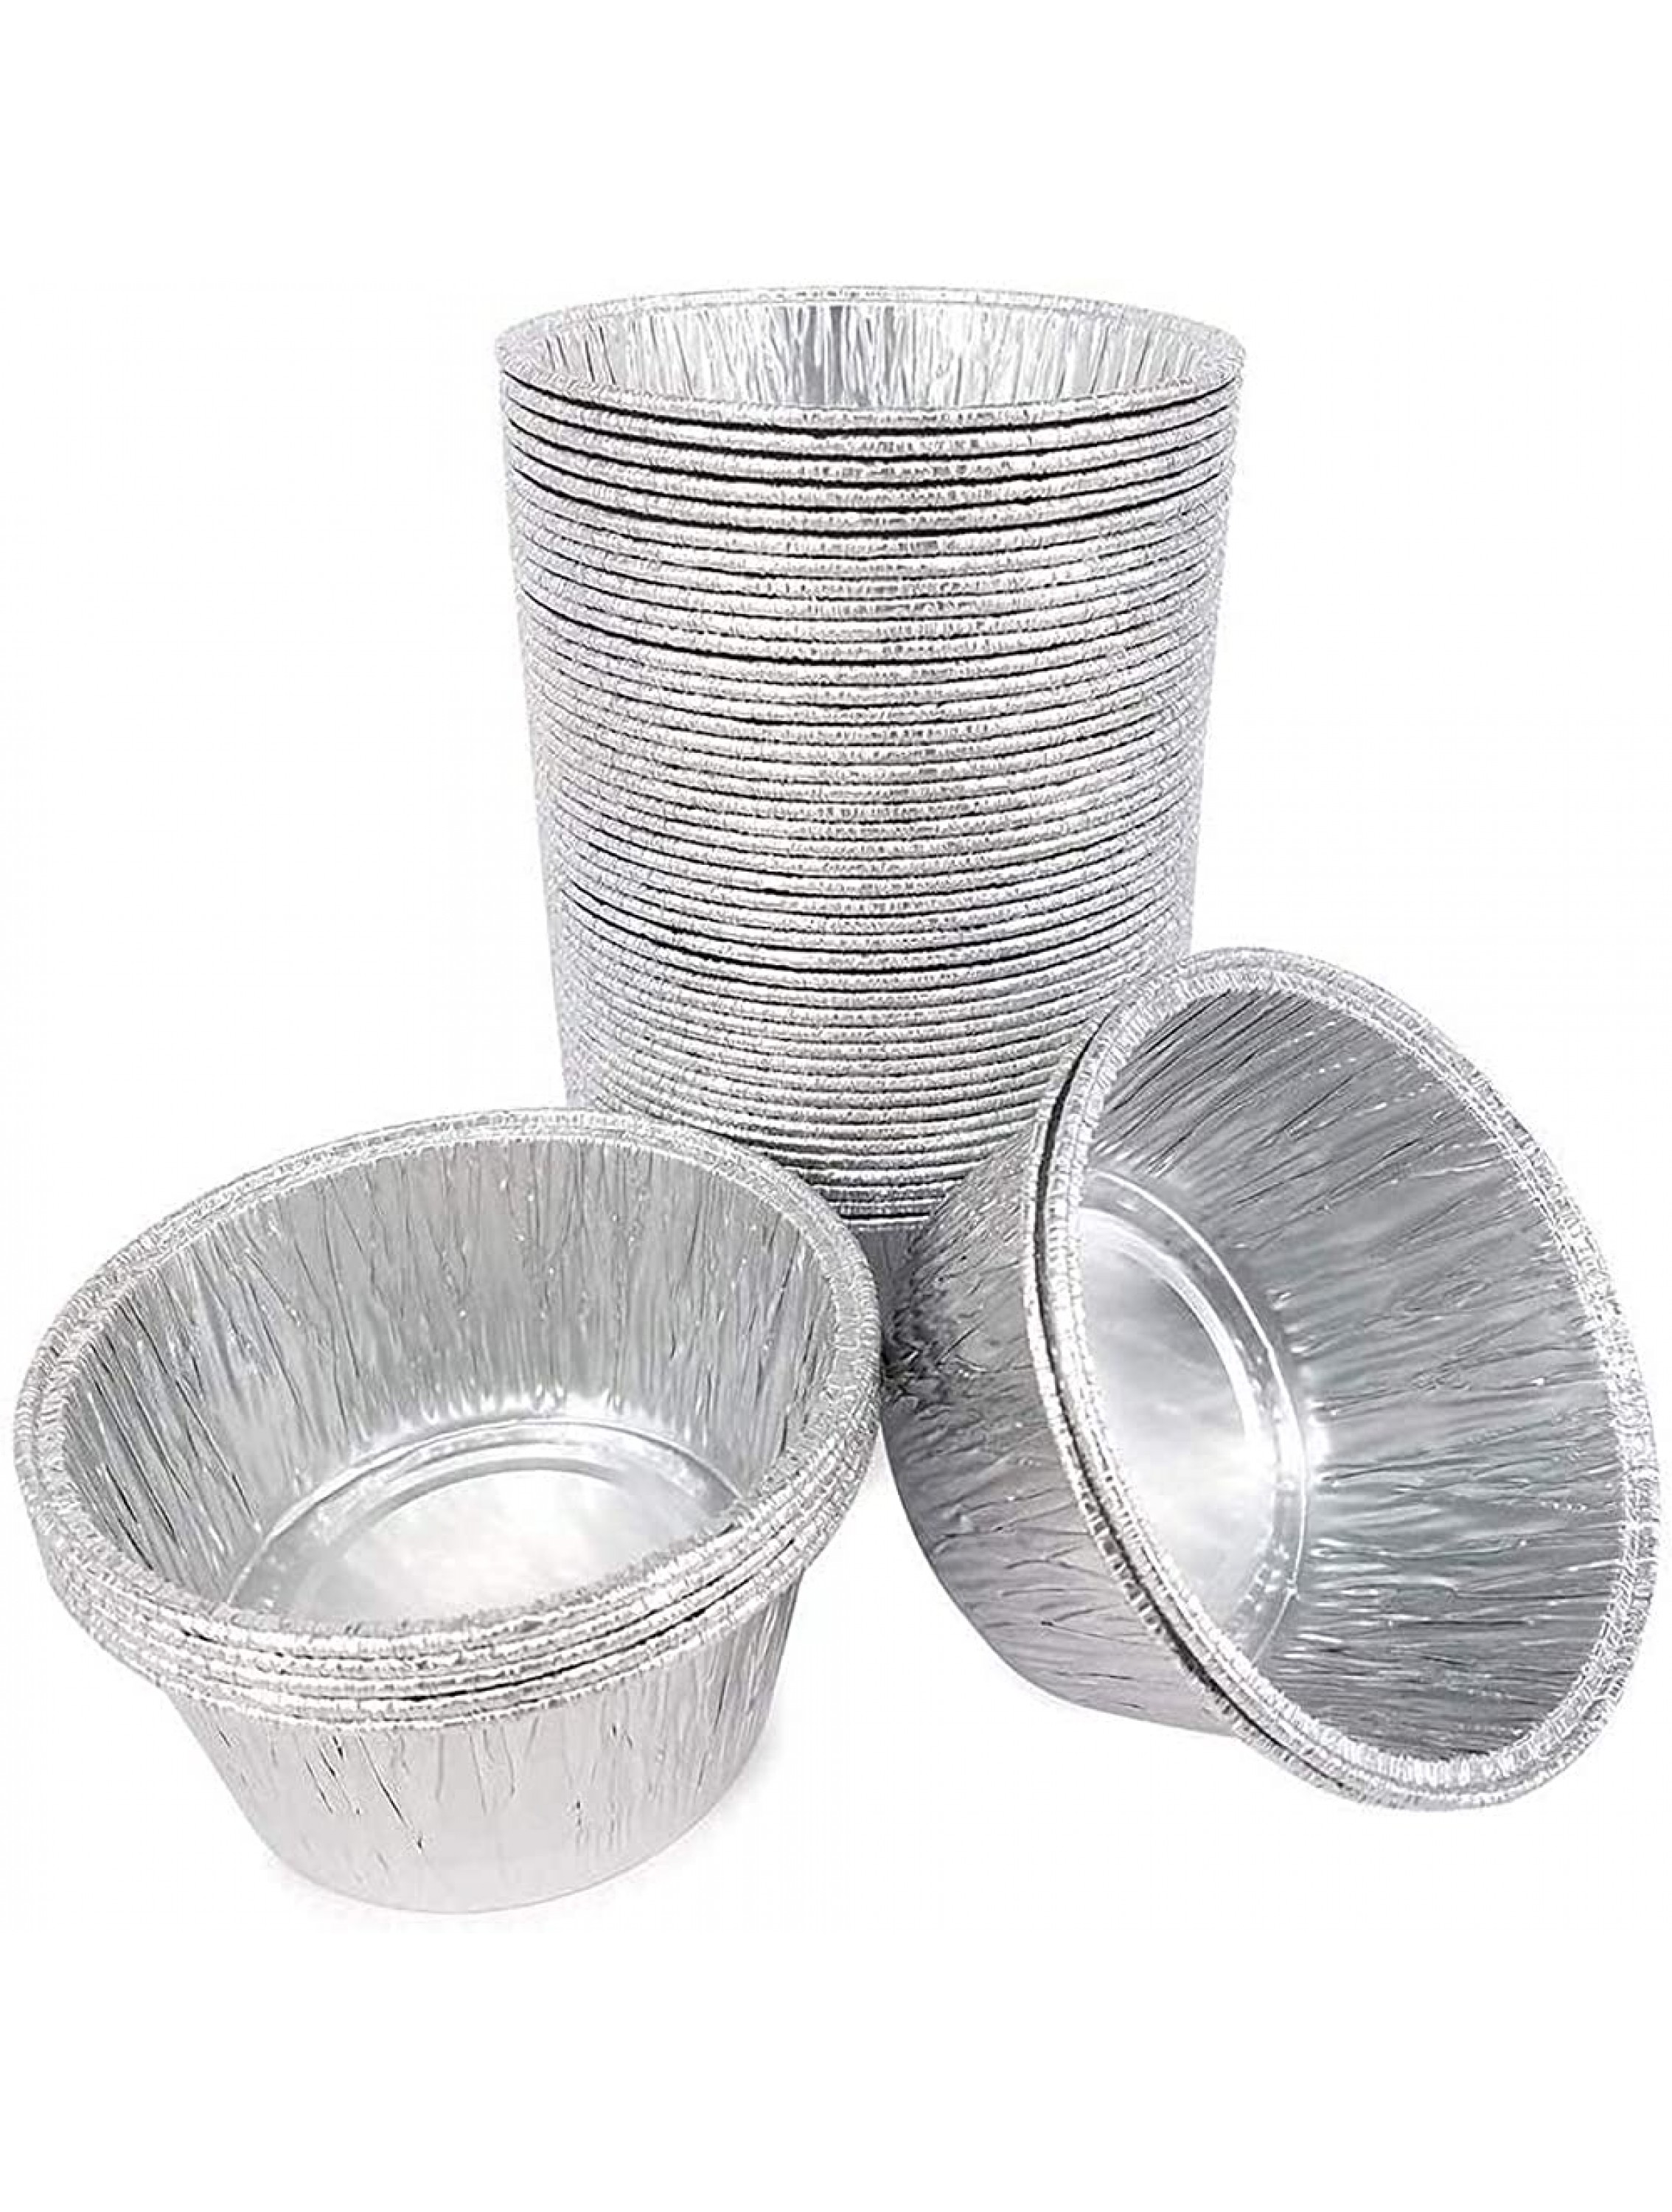 Disposable Round Aluminum Foil Trays Containers Cake Cup Mini Tart Pans 3.2x3.2x1.4 Kitchen Baking BBQBarbecues Desserts Make Food For Kids Heat Food At Family Dinner Friends Dinner Party Wedding - BRY27A251